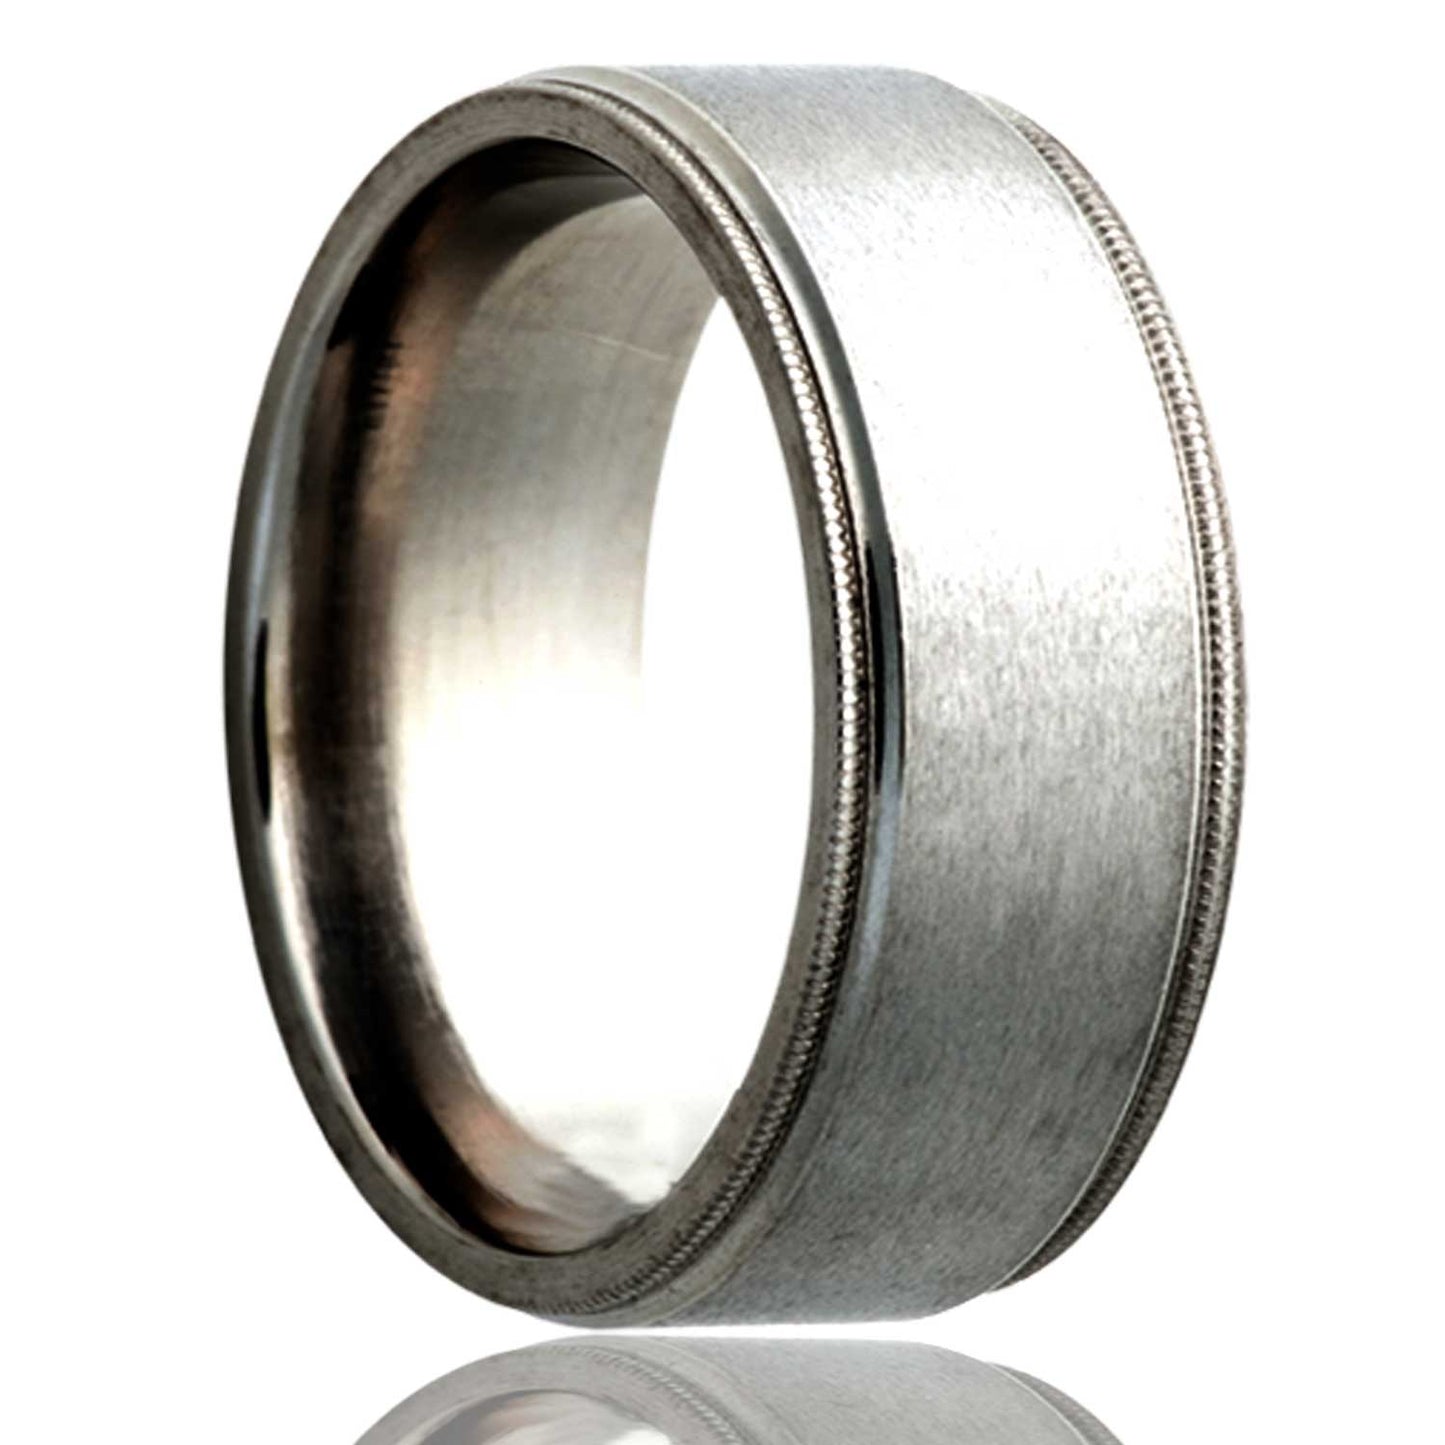 A satin finish titanium wedding band with thin stepped edges displayed on a neutral white background.